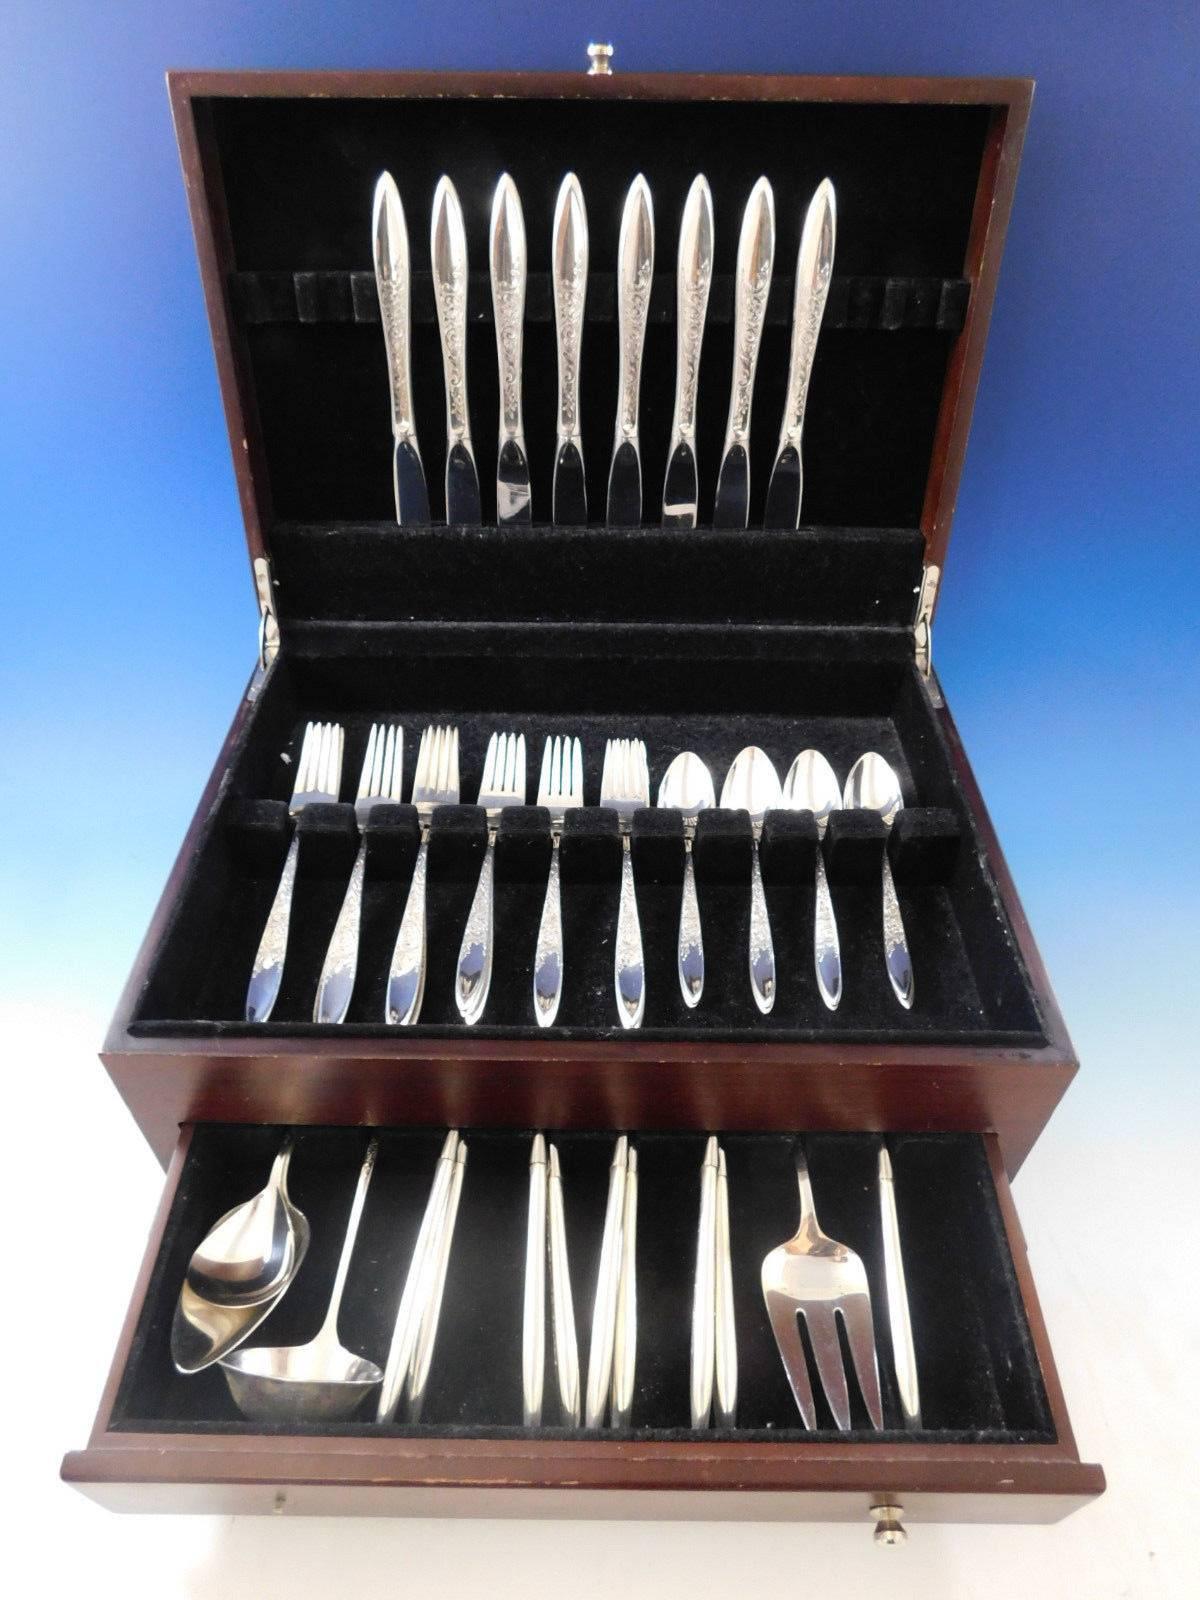 White Paisley by Gorham sterling silver Flatware set - 45 pieces. This pattern was introduced in the year 1966 and features a contemporary shaped handle that is partially engraved with flowing scrolls and floral detailing. This set includes:

Eight